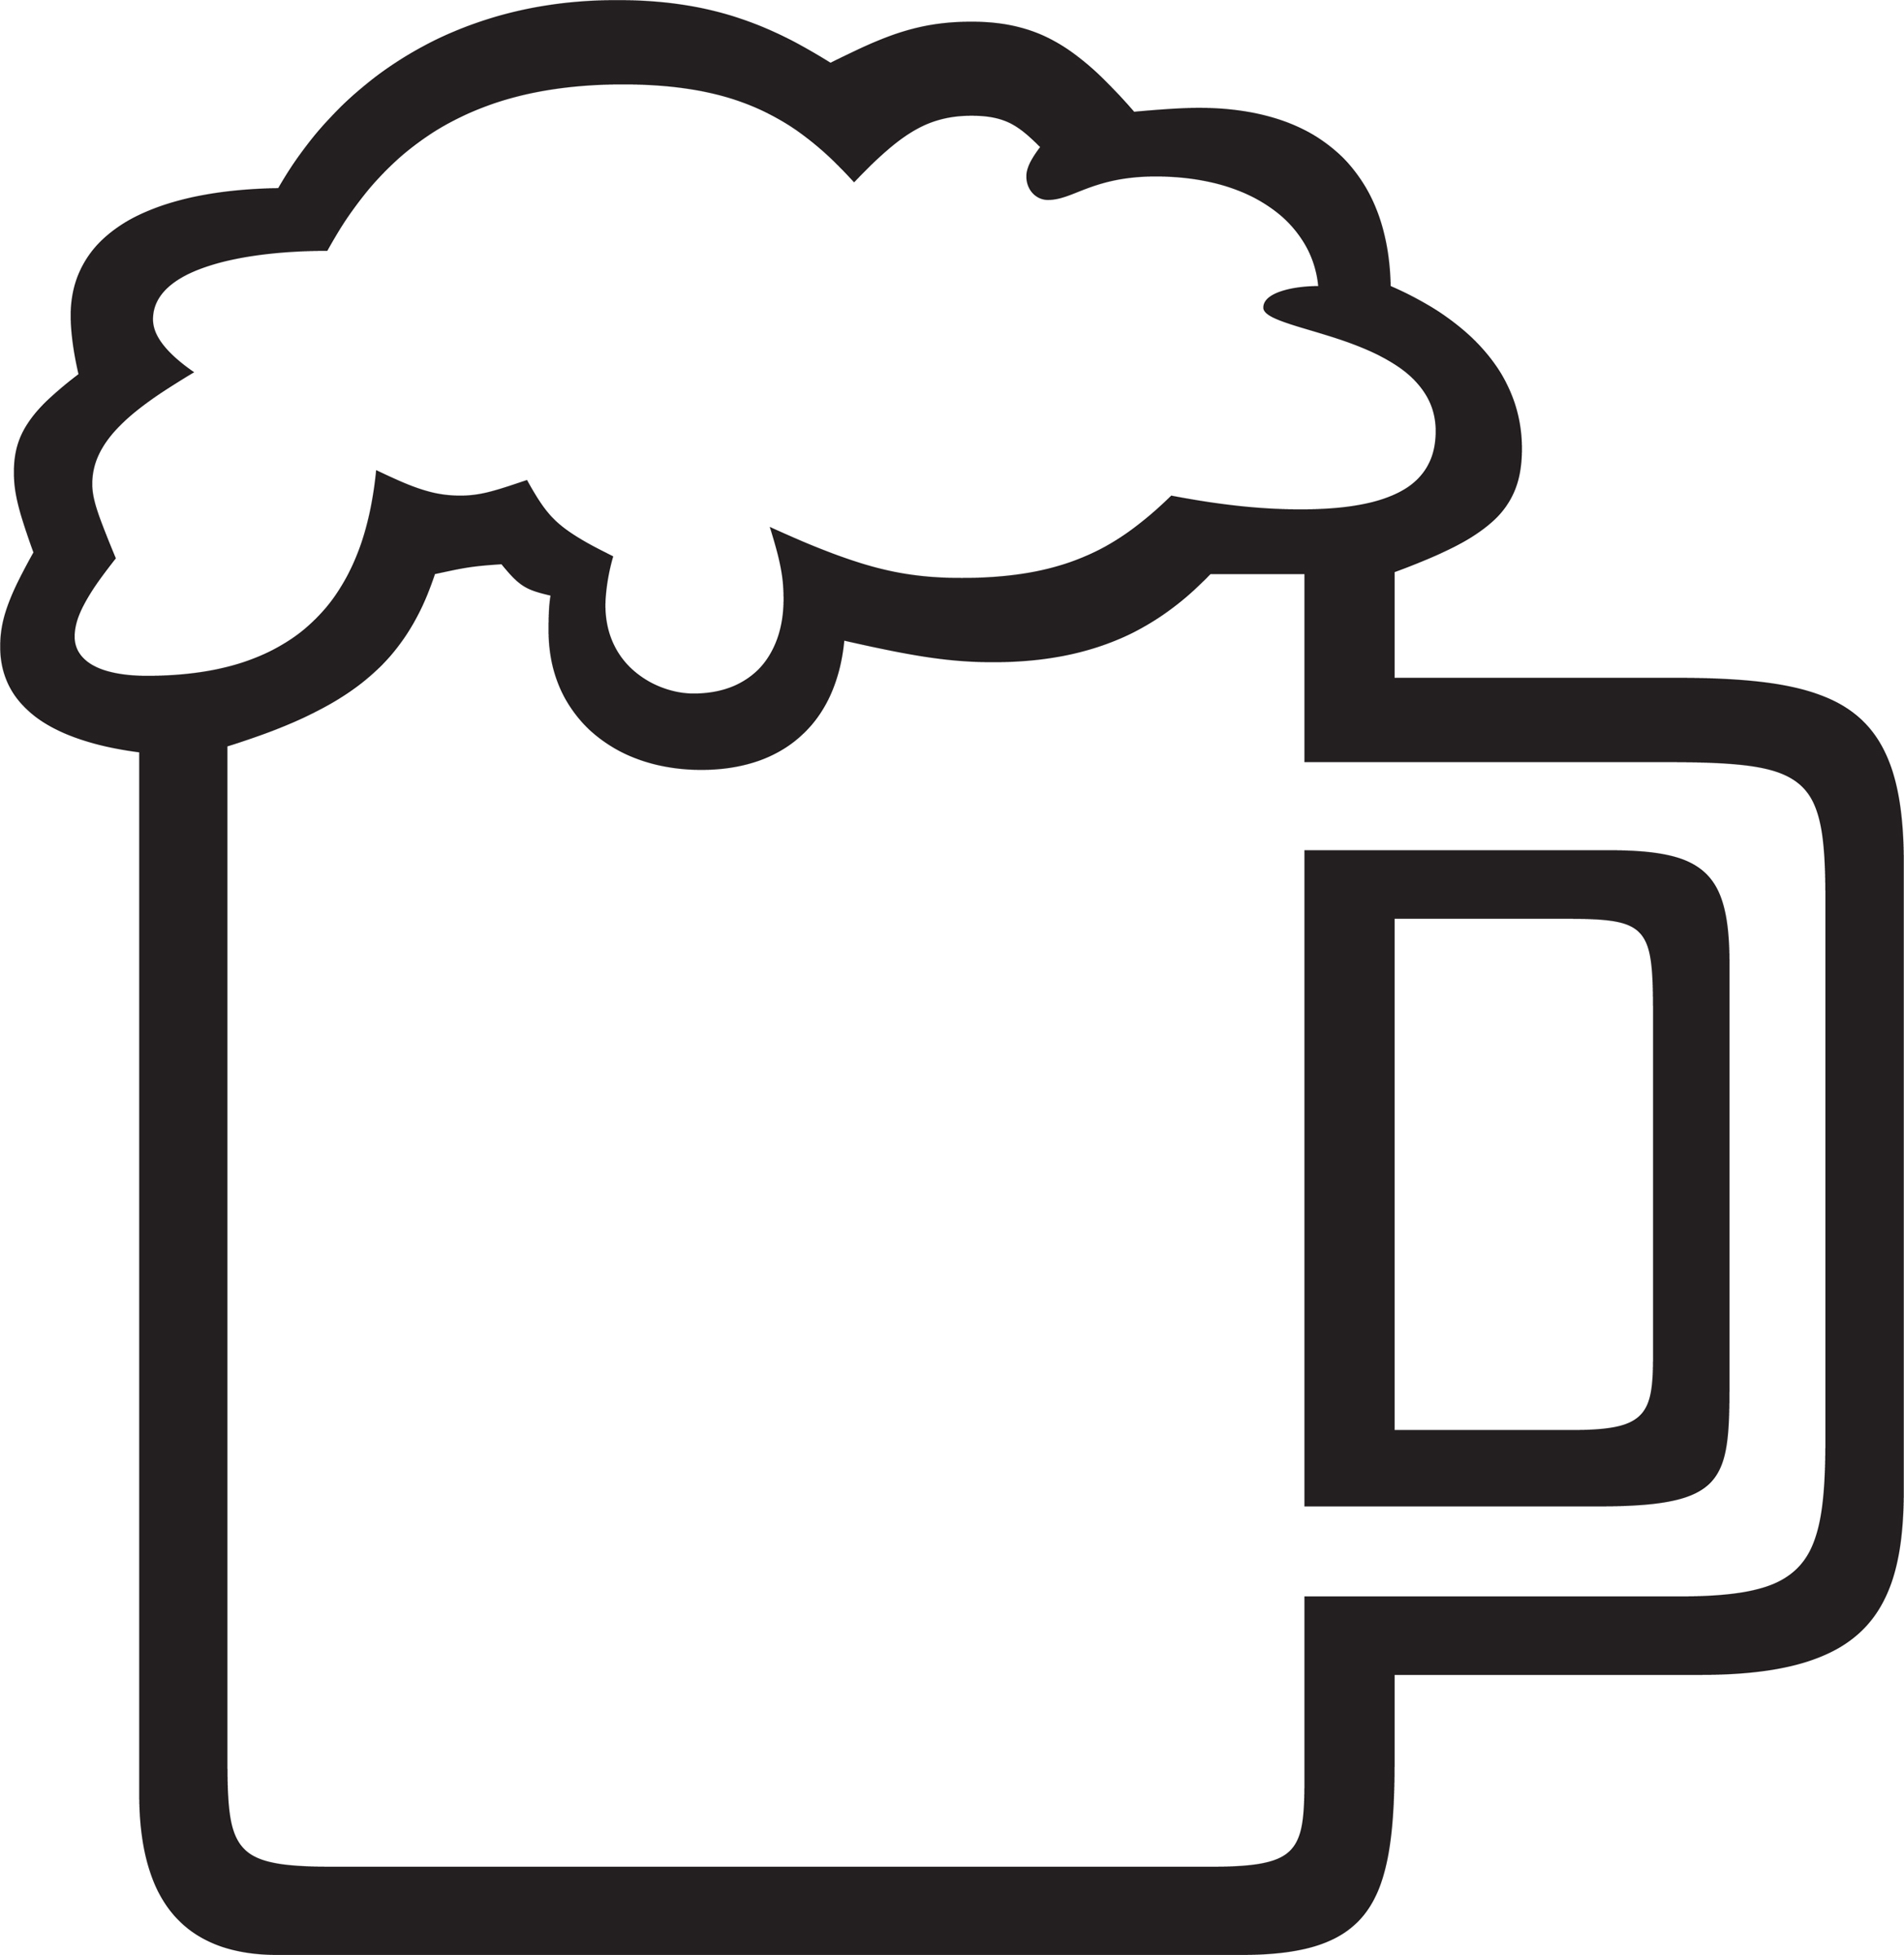 Free Beer Clipart Black And White, Download Free Clip Art.